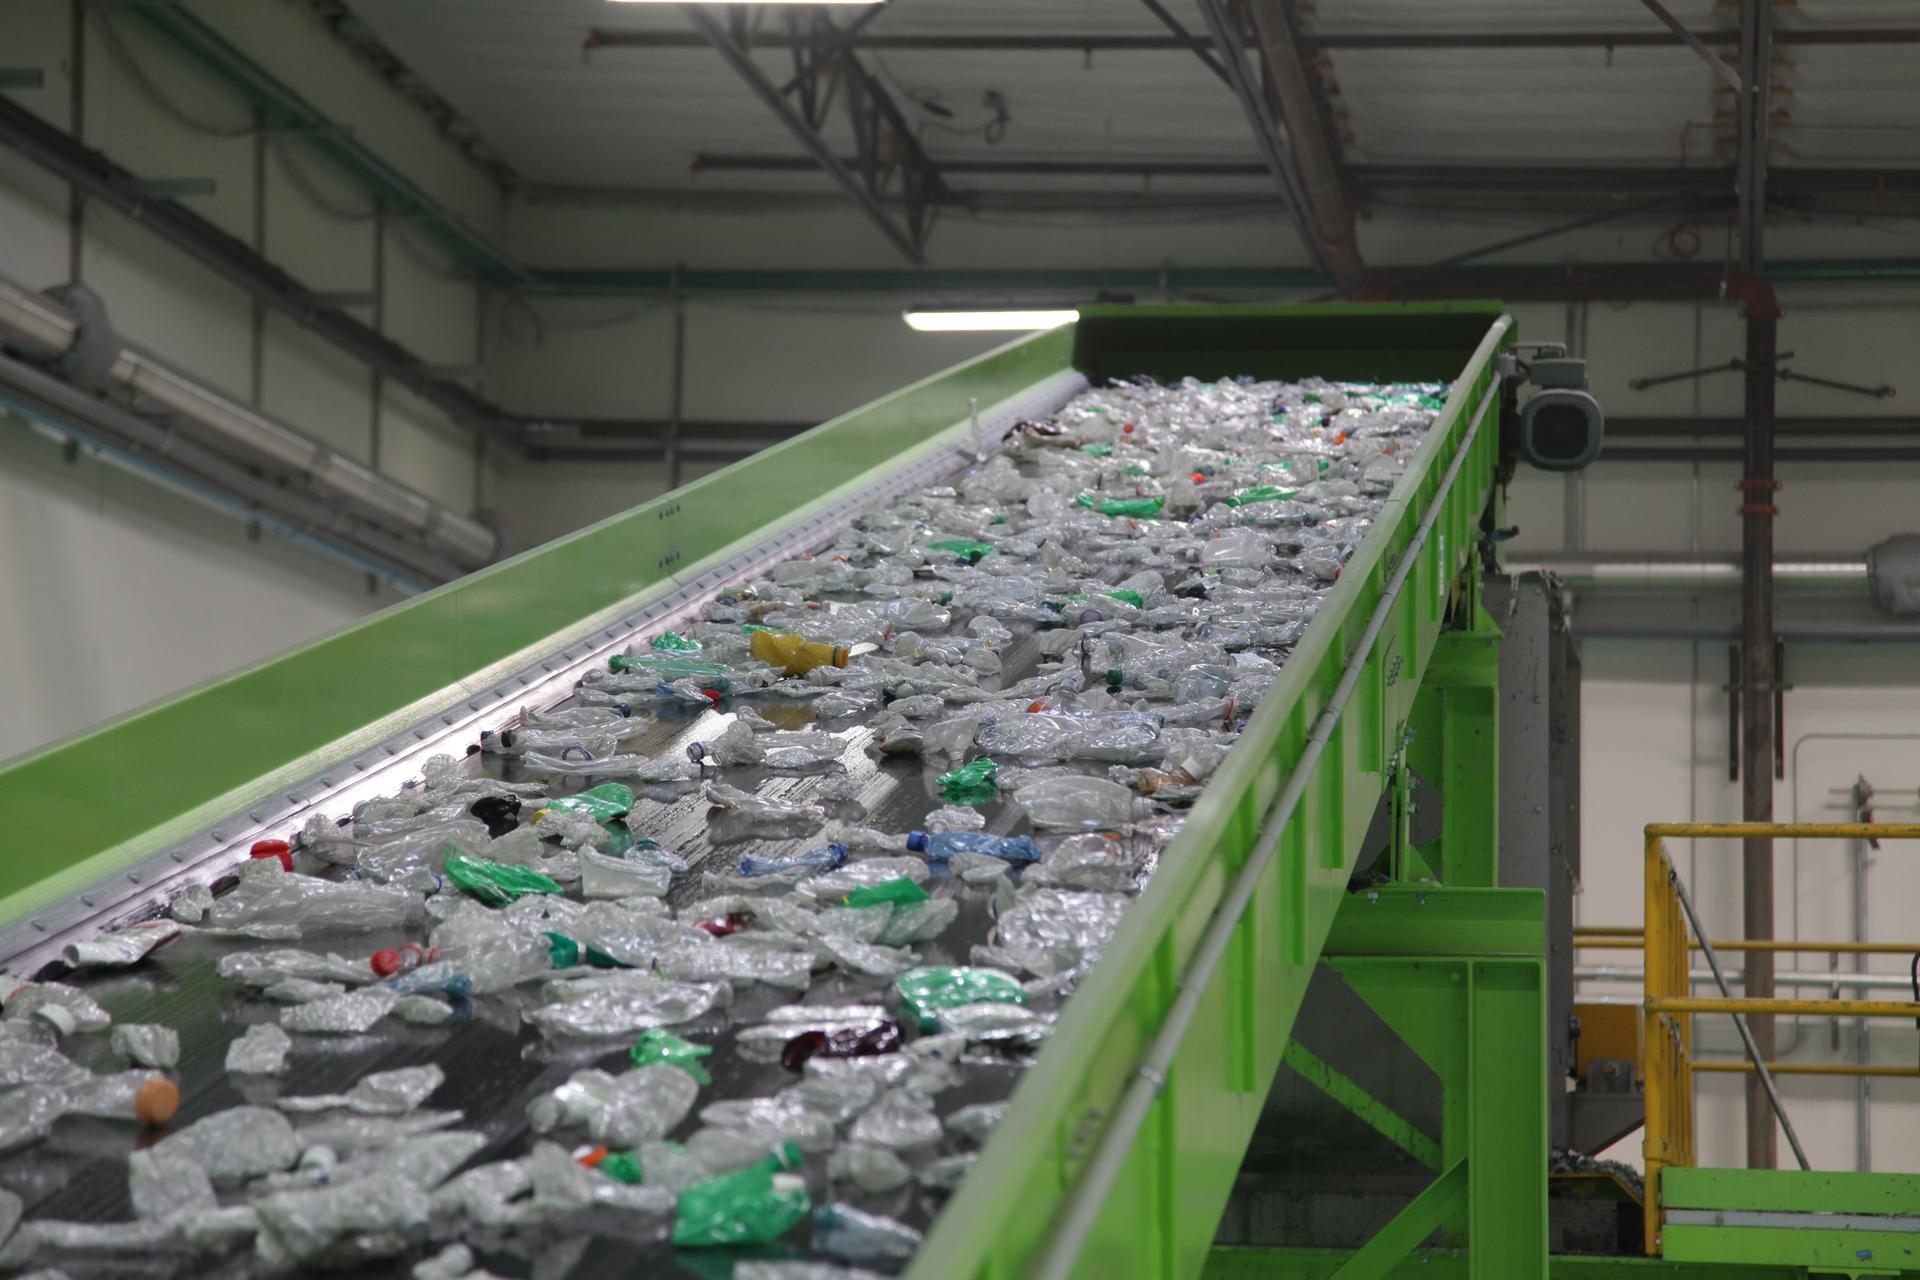 The CarbonLITE facility, which opened at the end of 2011, processes about 2 billion bottles a year. It's a closed loop recycling facility: plastic bottles are turned back into bottles to maximize recovery of the raw material.